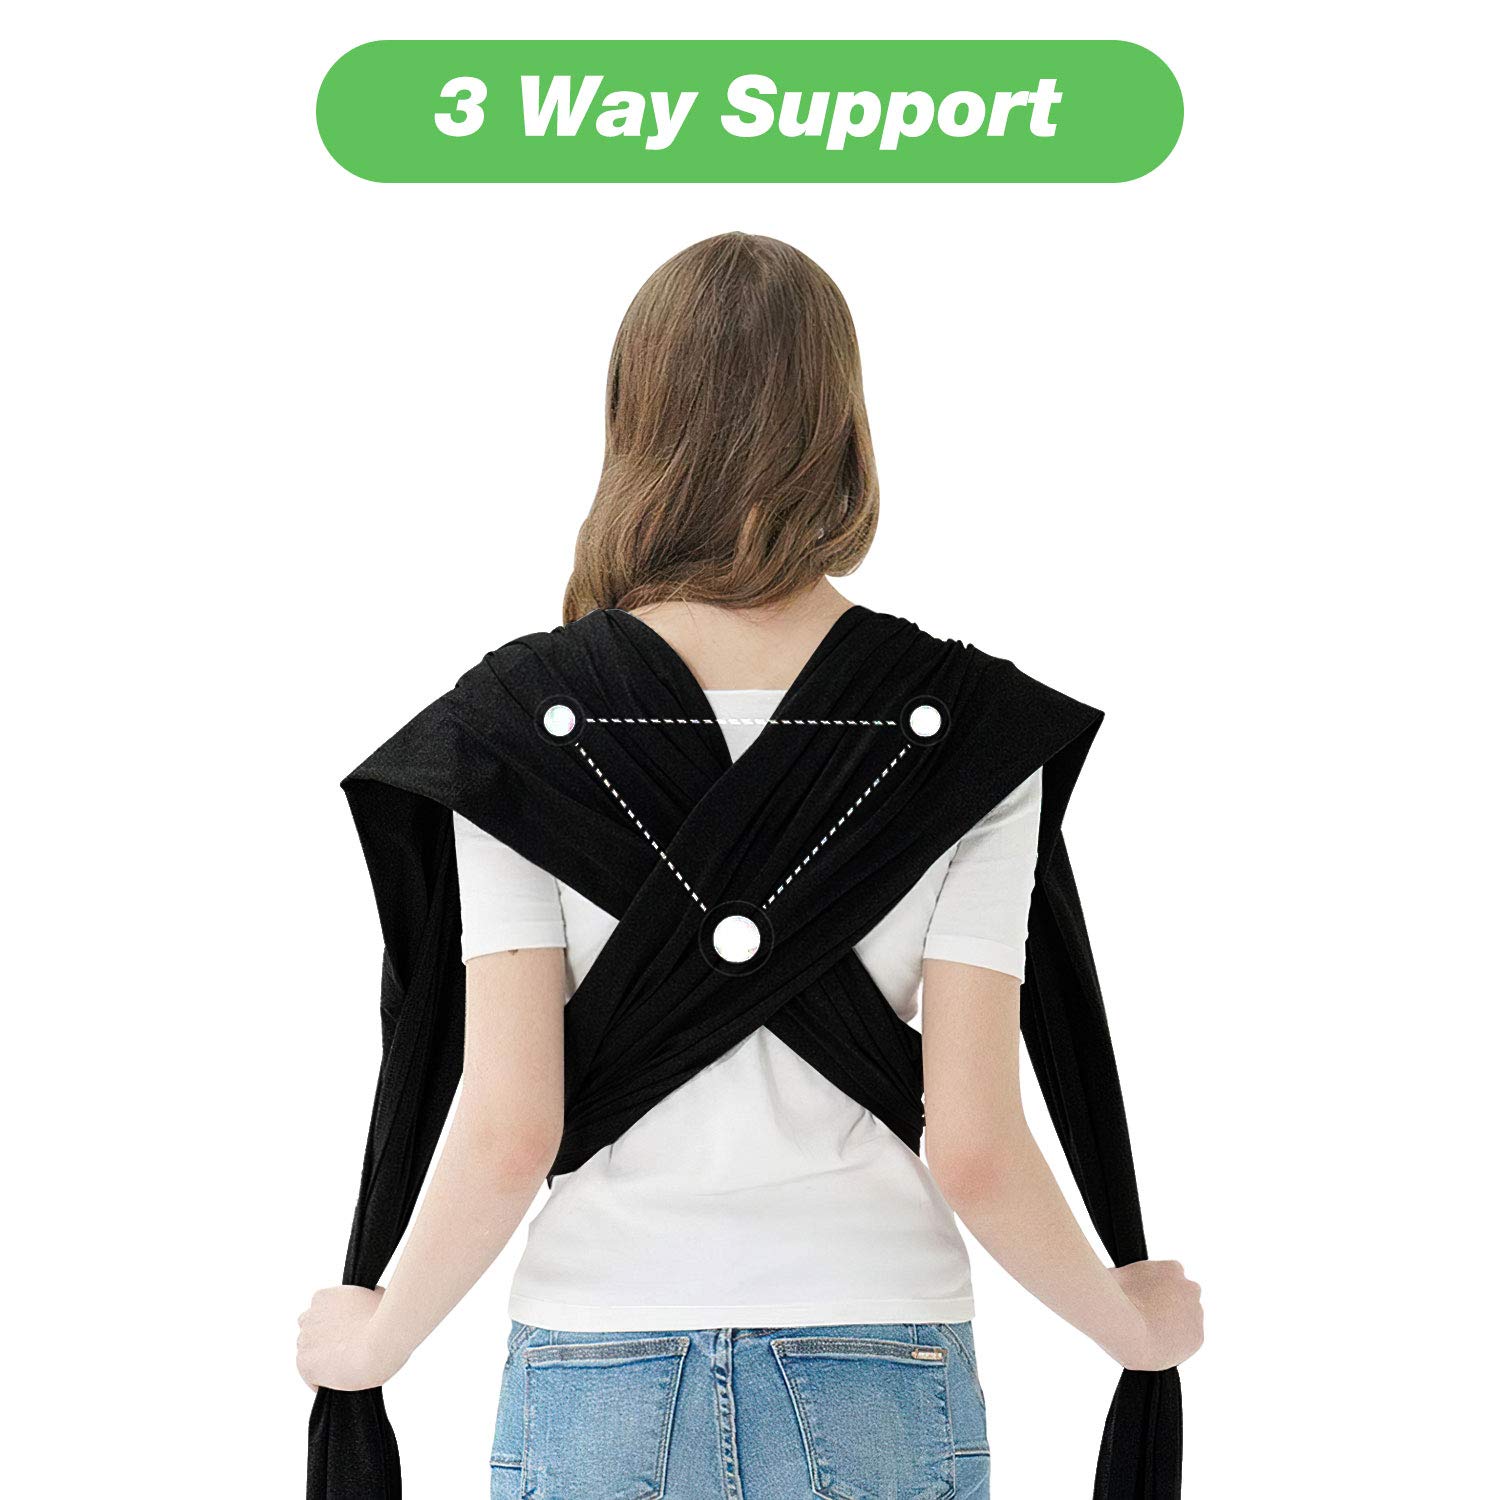 Lightweight Breathable Soft Baby Carrier Sling Hands-Free Sling - Perfect for Newborn